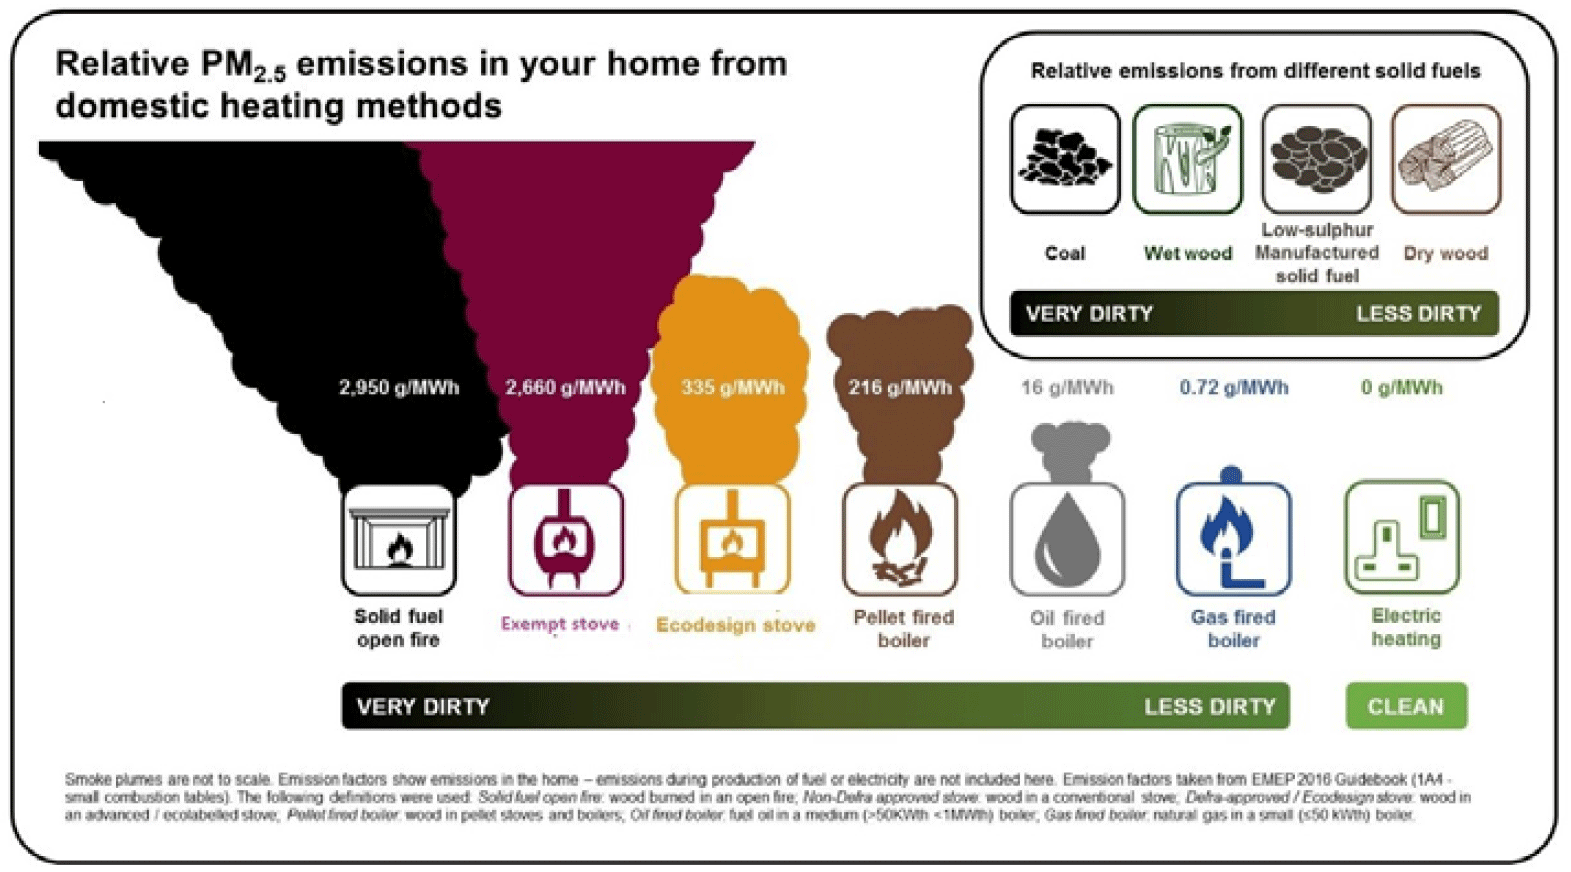 Burning solid fuel in an open fire produces the most emissions, with electric heating systems producing the least emissions.